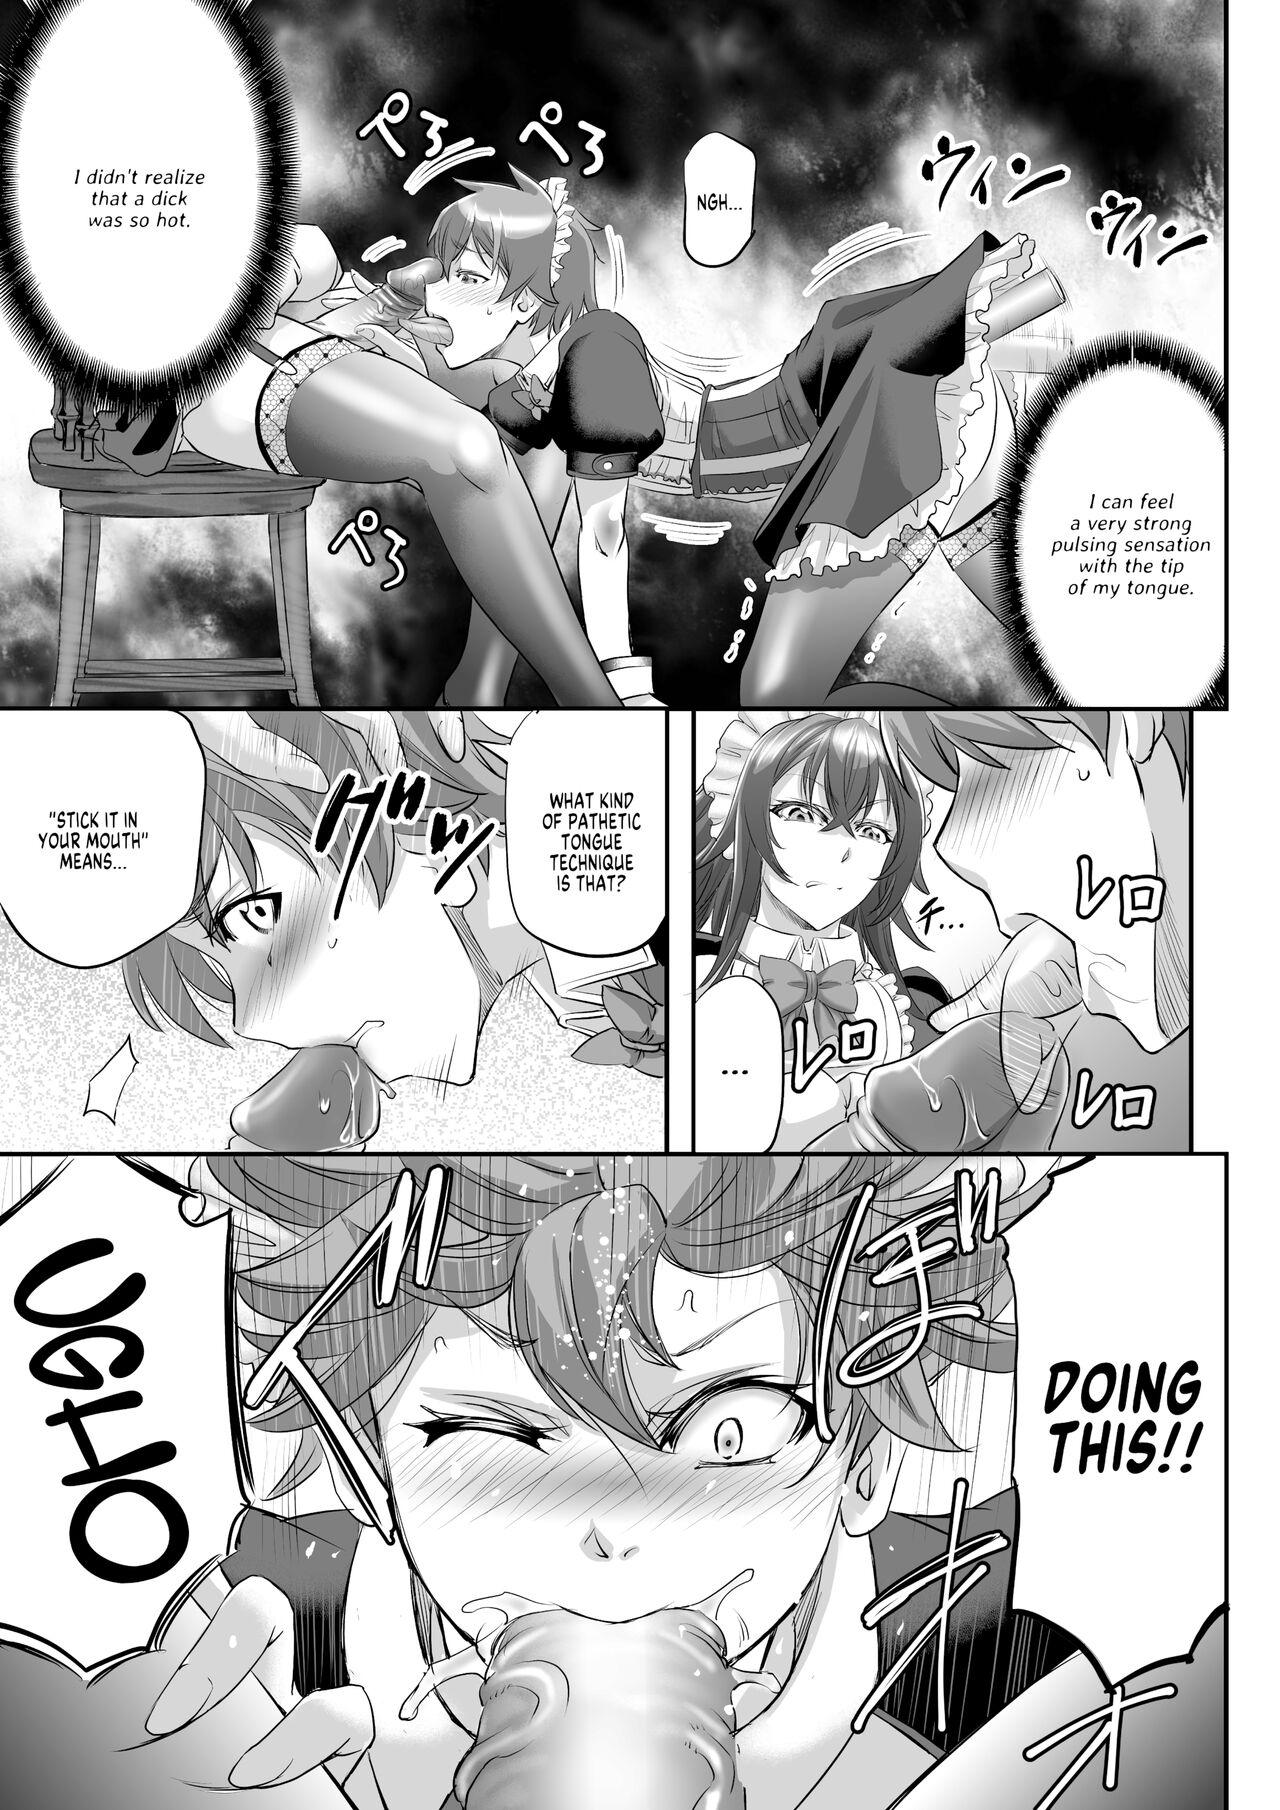 Gay Big Cock MonMusu Quest! ~ Luka no Maid Shugyou | Monster Girl Quest! Luka’s Maid Training - Monster girl quest Shy - Page 11